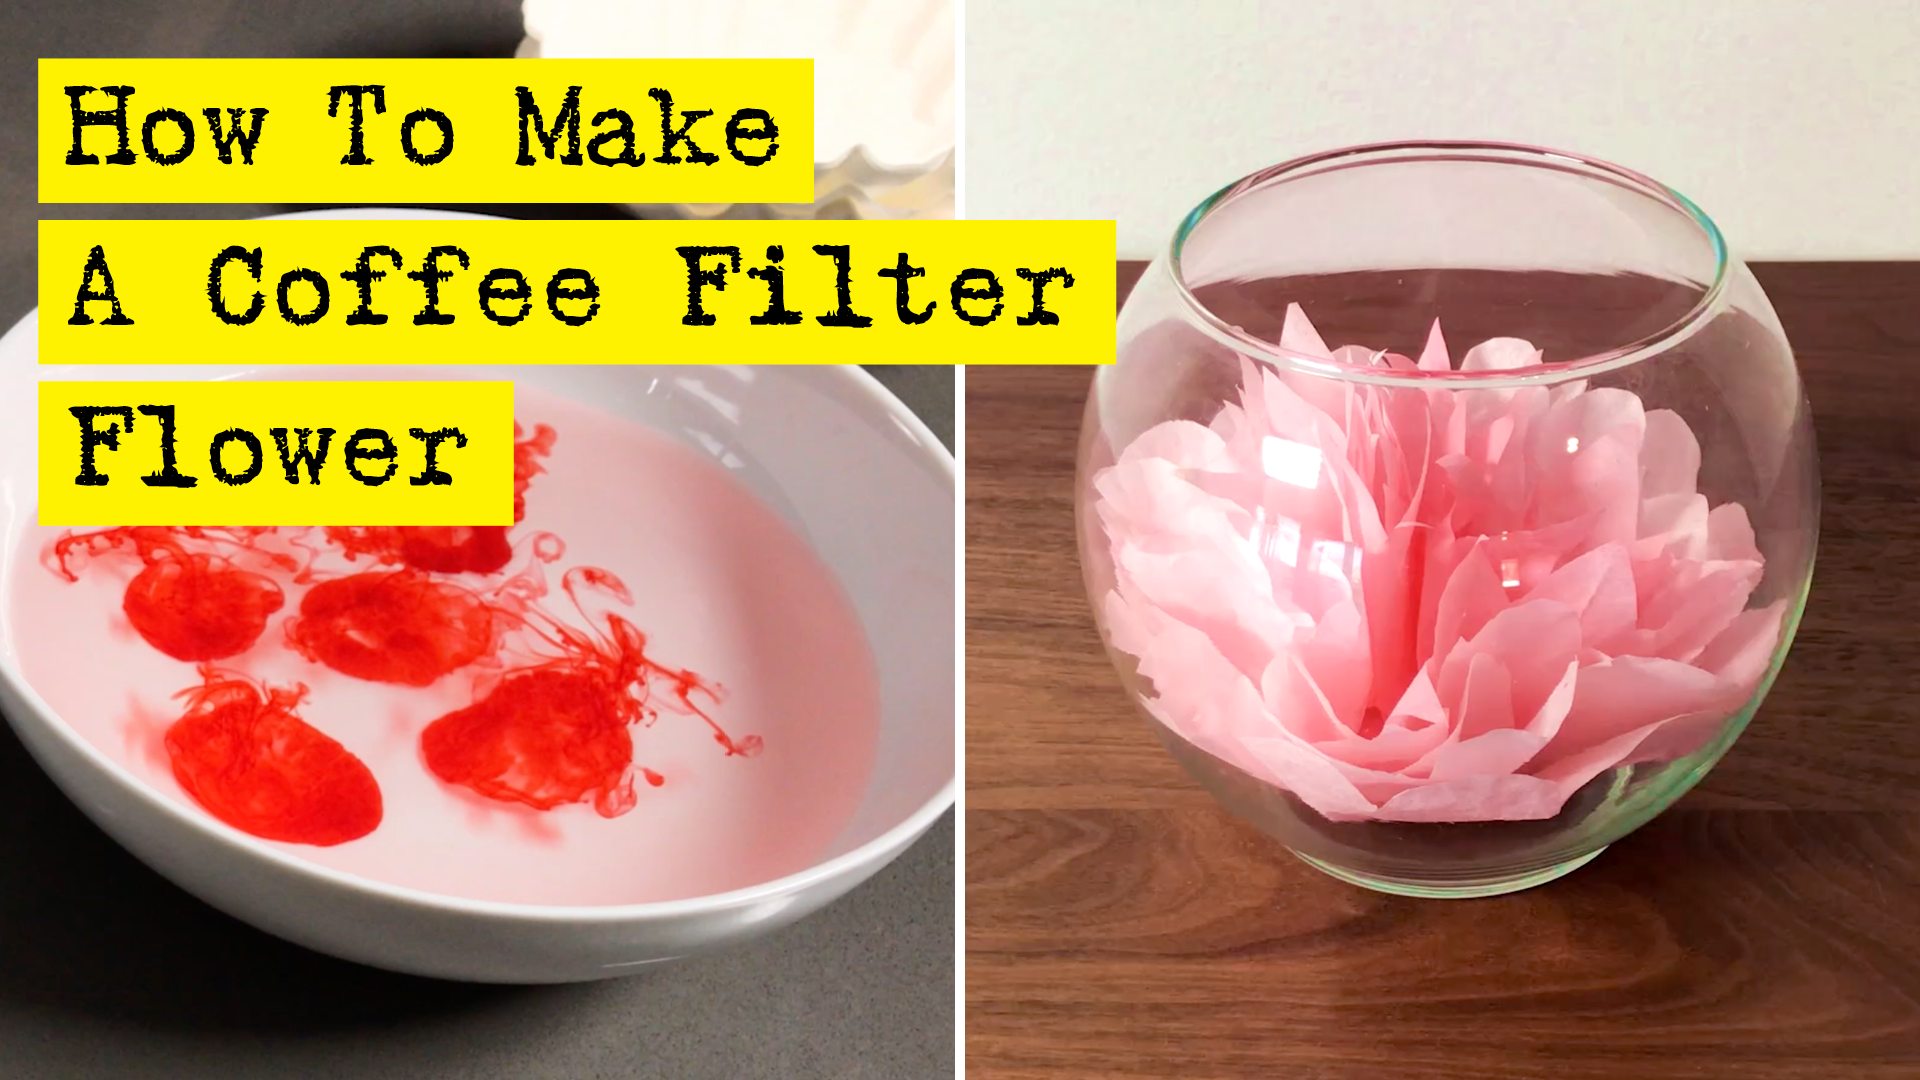 How To Make A Coffee Filter Flower by DIY Presto!